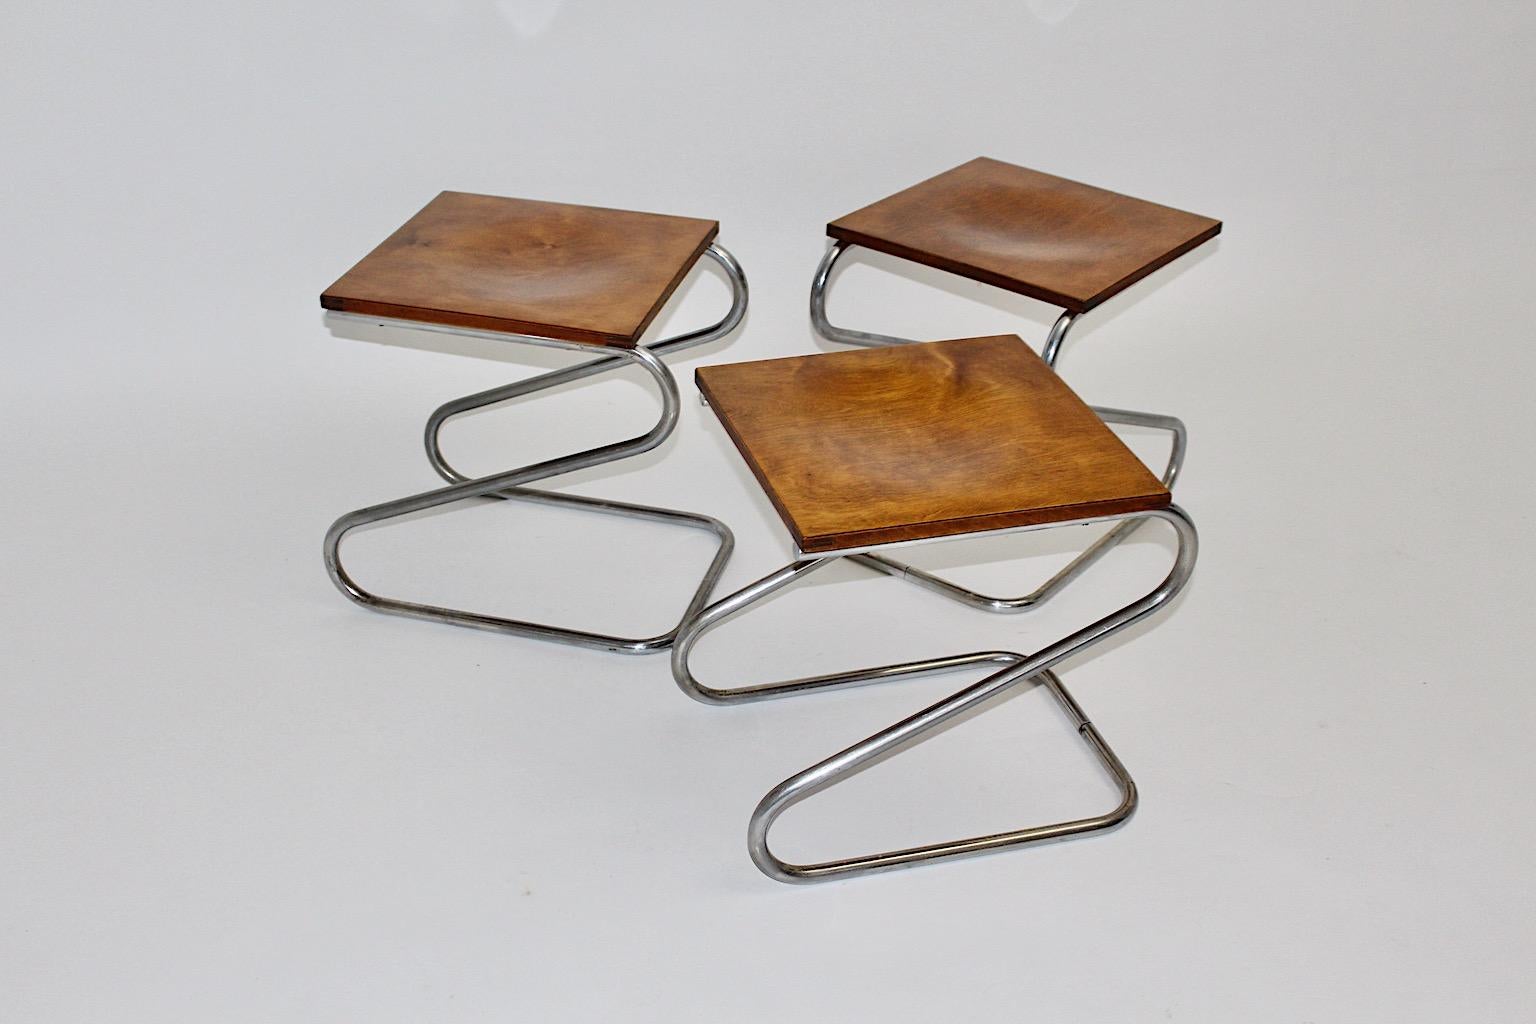 Art Deco Bauhaus era vintage three chromed steel stools, which were designed and made 1930s, Germany.
The vintage stools were made of curved chromed tube steel and moulded ash veneered plywood seats.
Throughout the simple cooperation from chromed